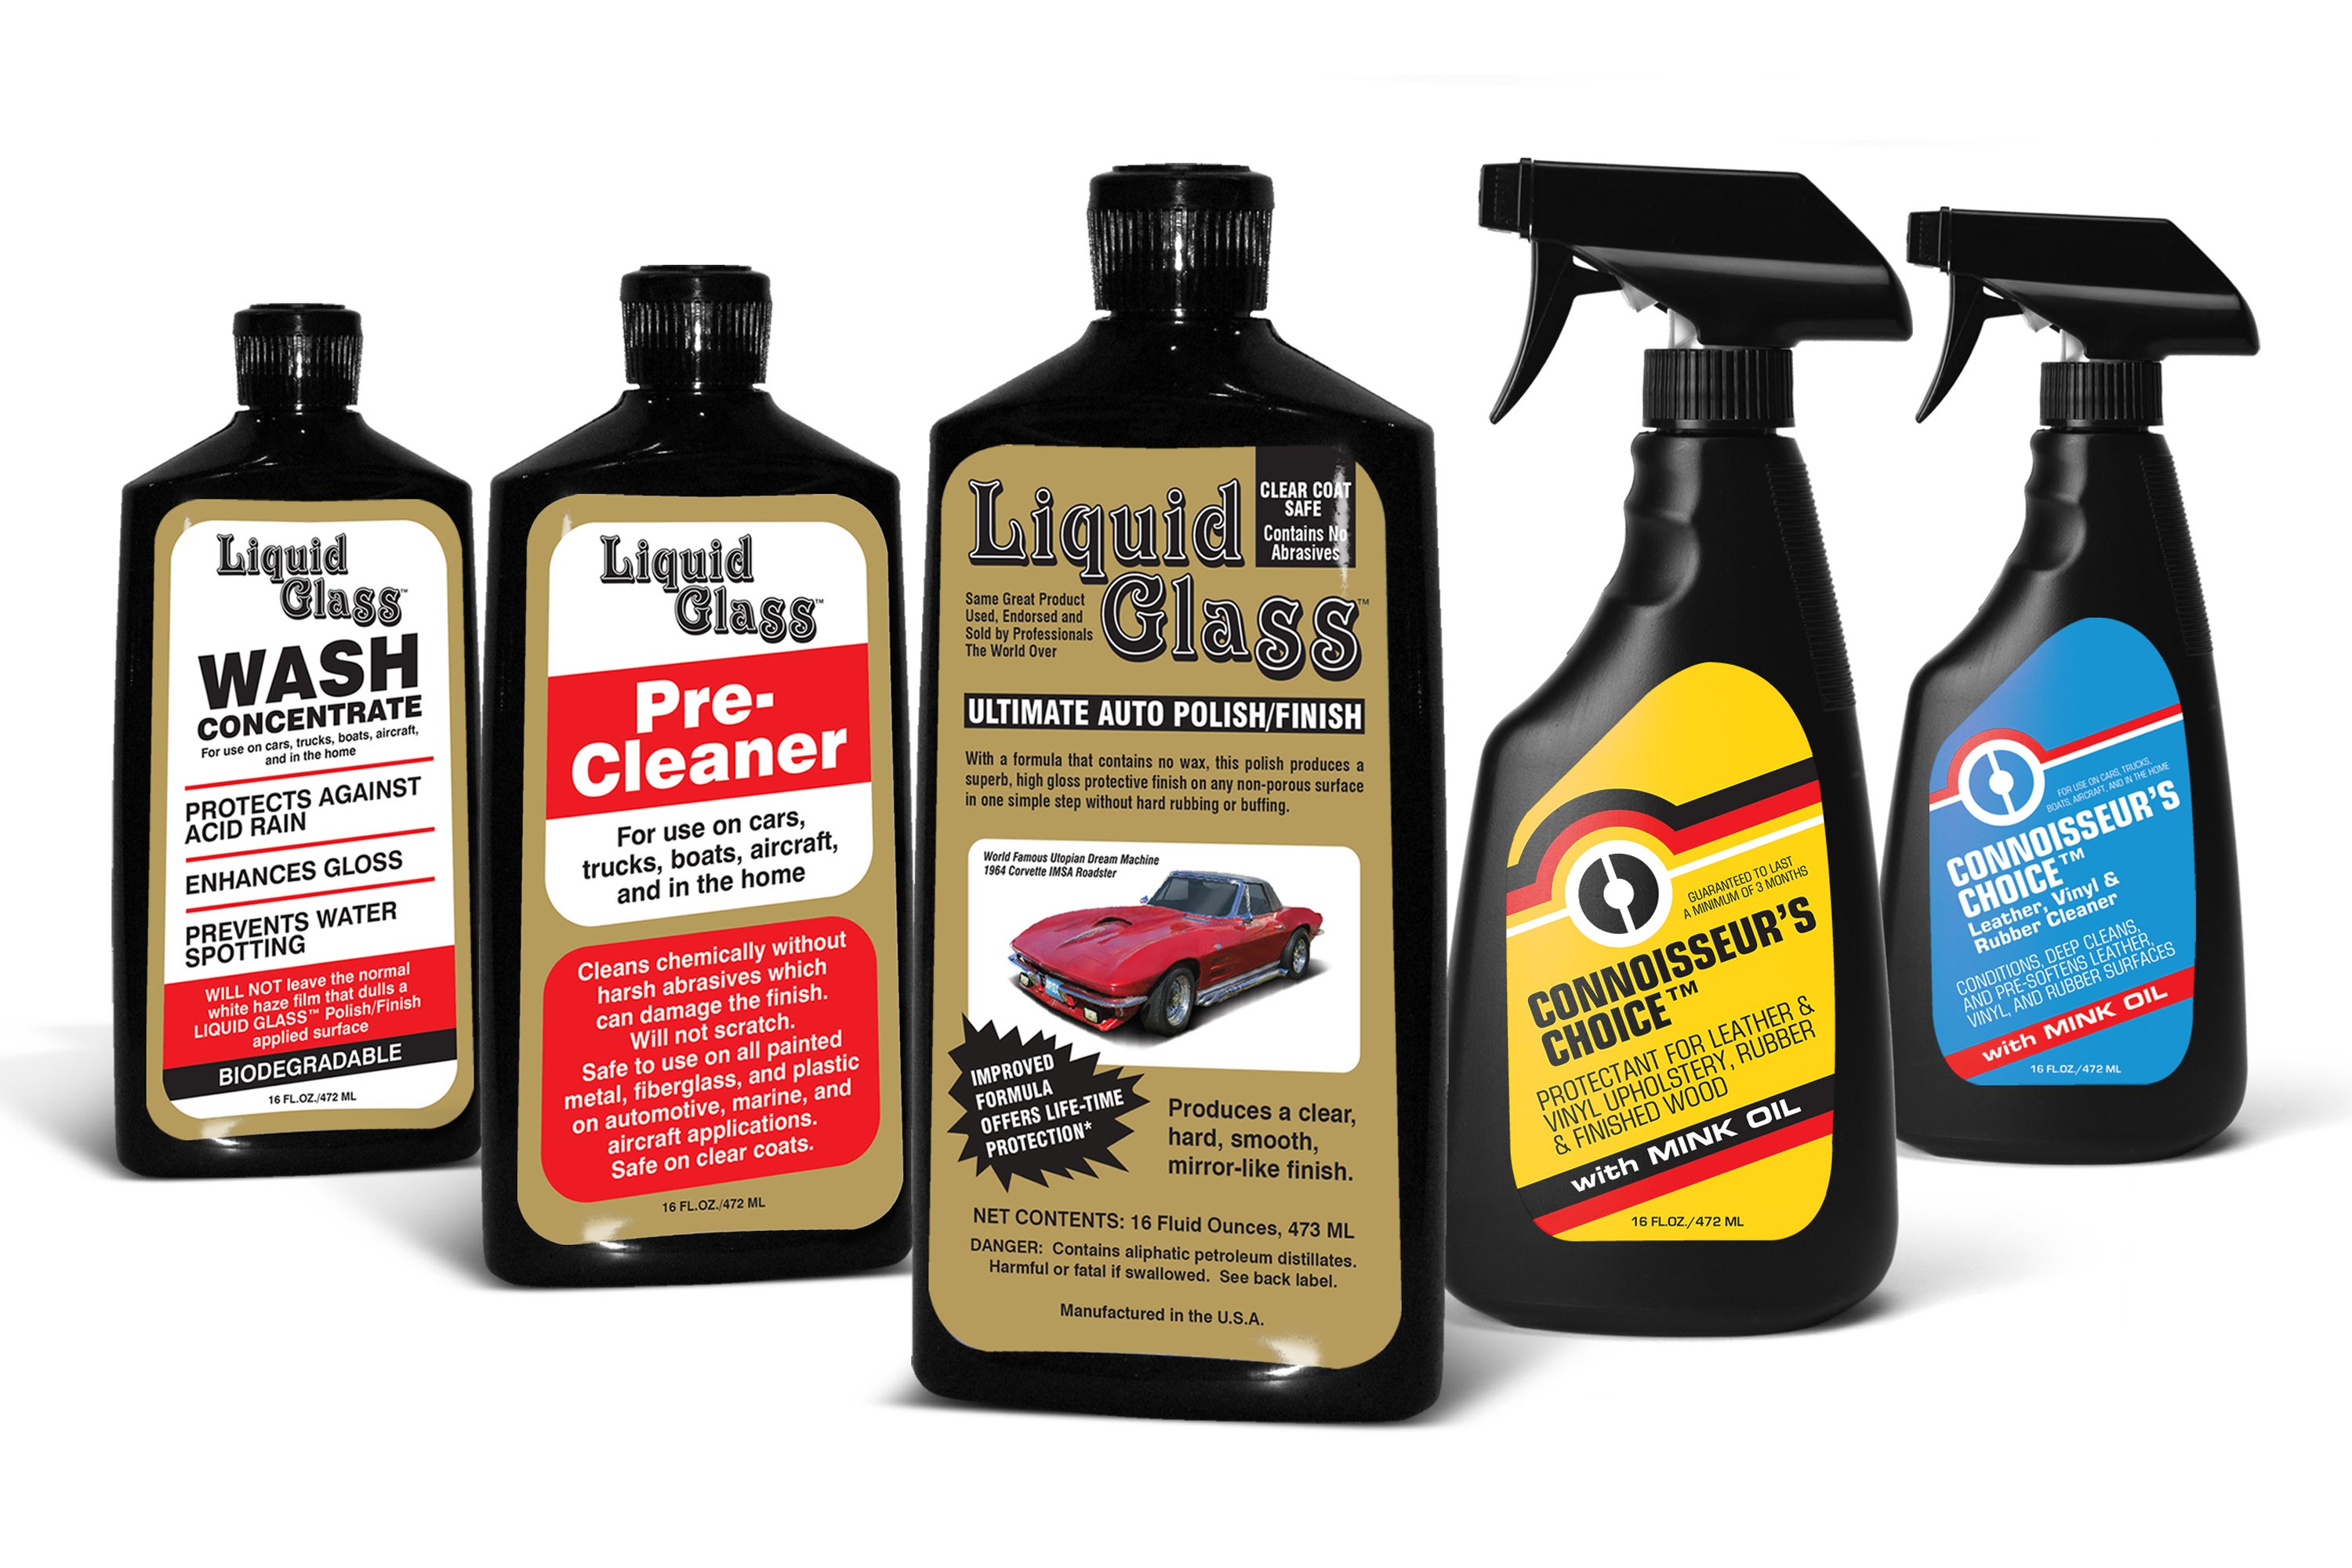 Ask The Expert: How to Polish And Protect Your Paint With Liquid Glass